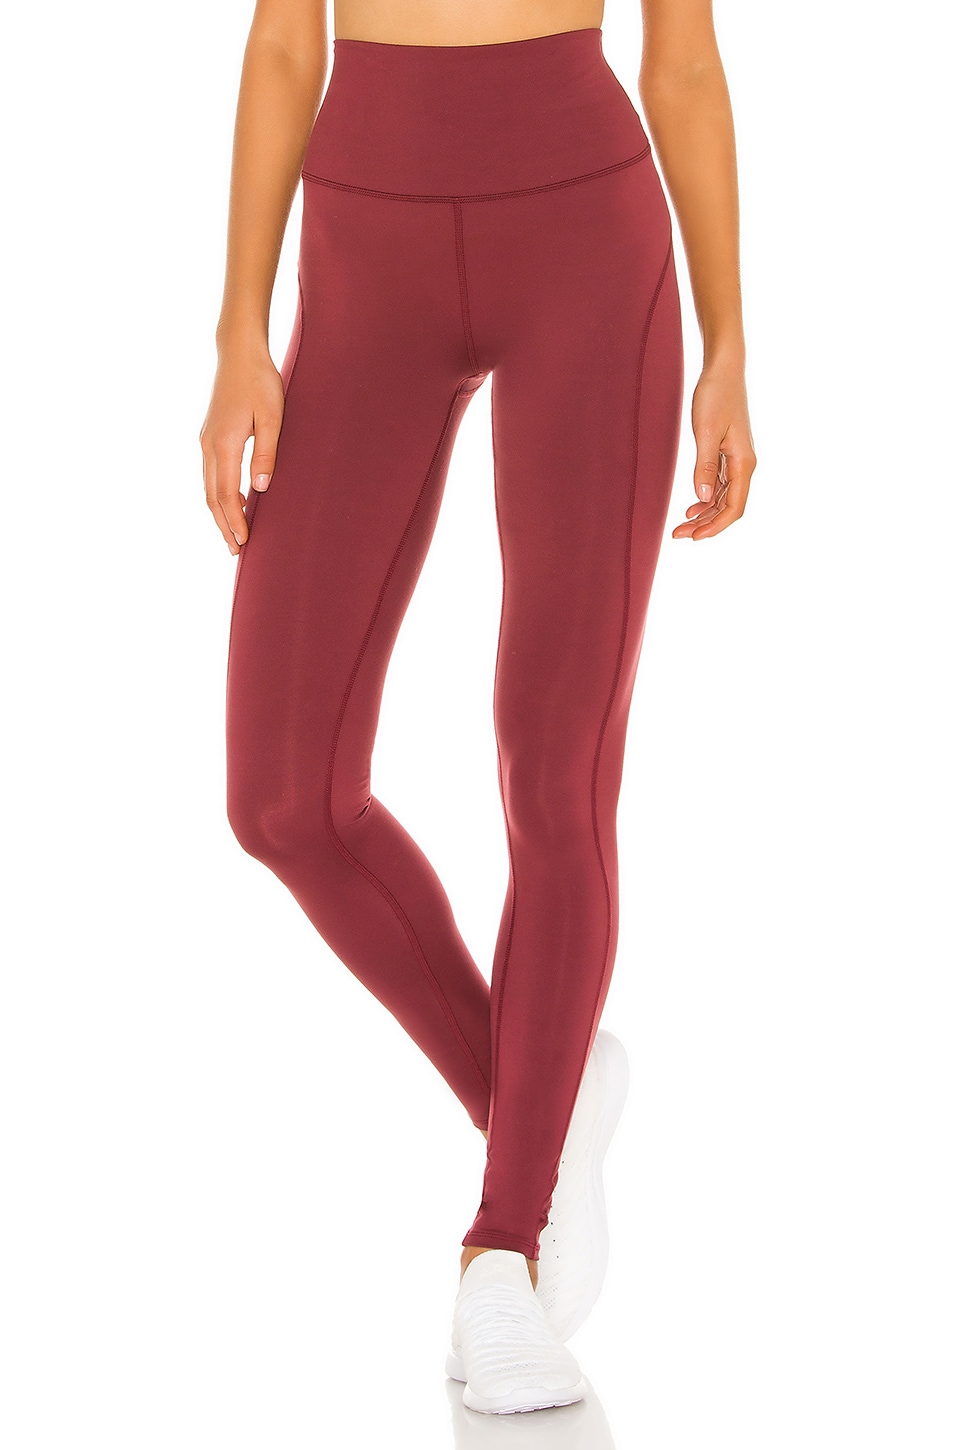 Free People X FP Movement Good Times Legging in Wine | REVOLVE